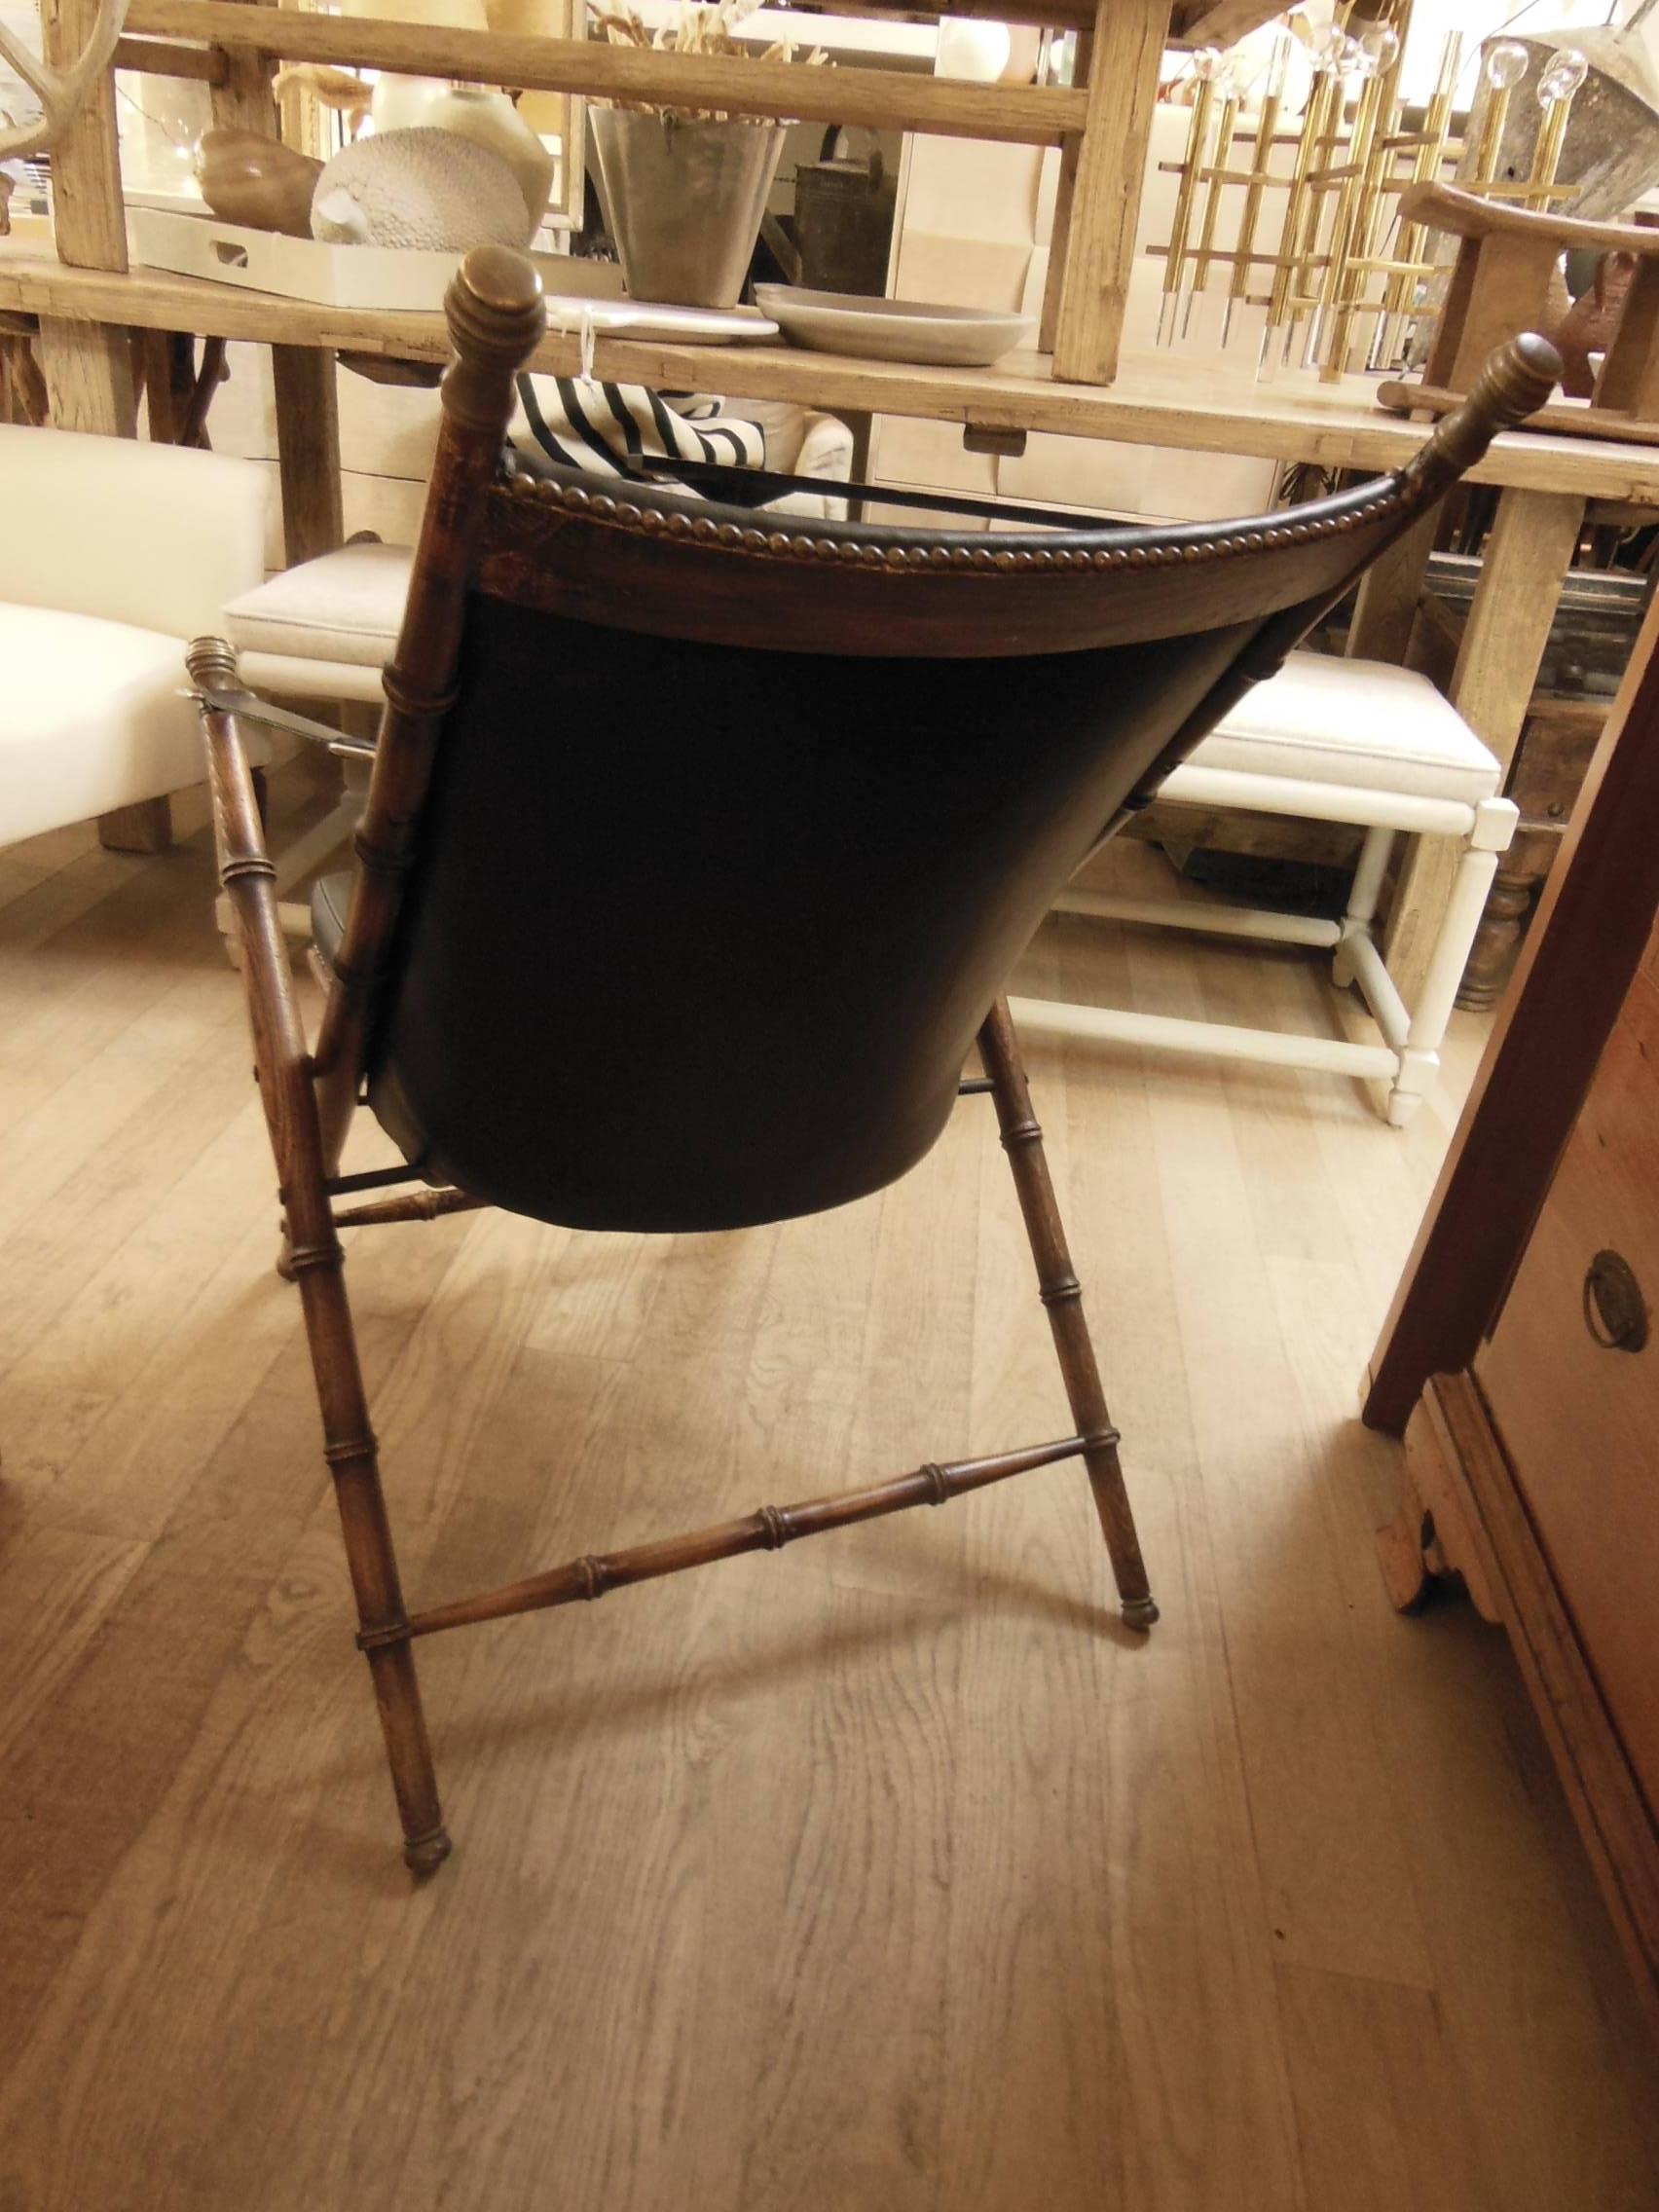 Vintage Leather Campaign Chair In Excellent Condition For Sale In Sag Harbor, NY